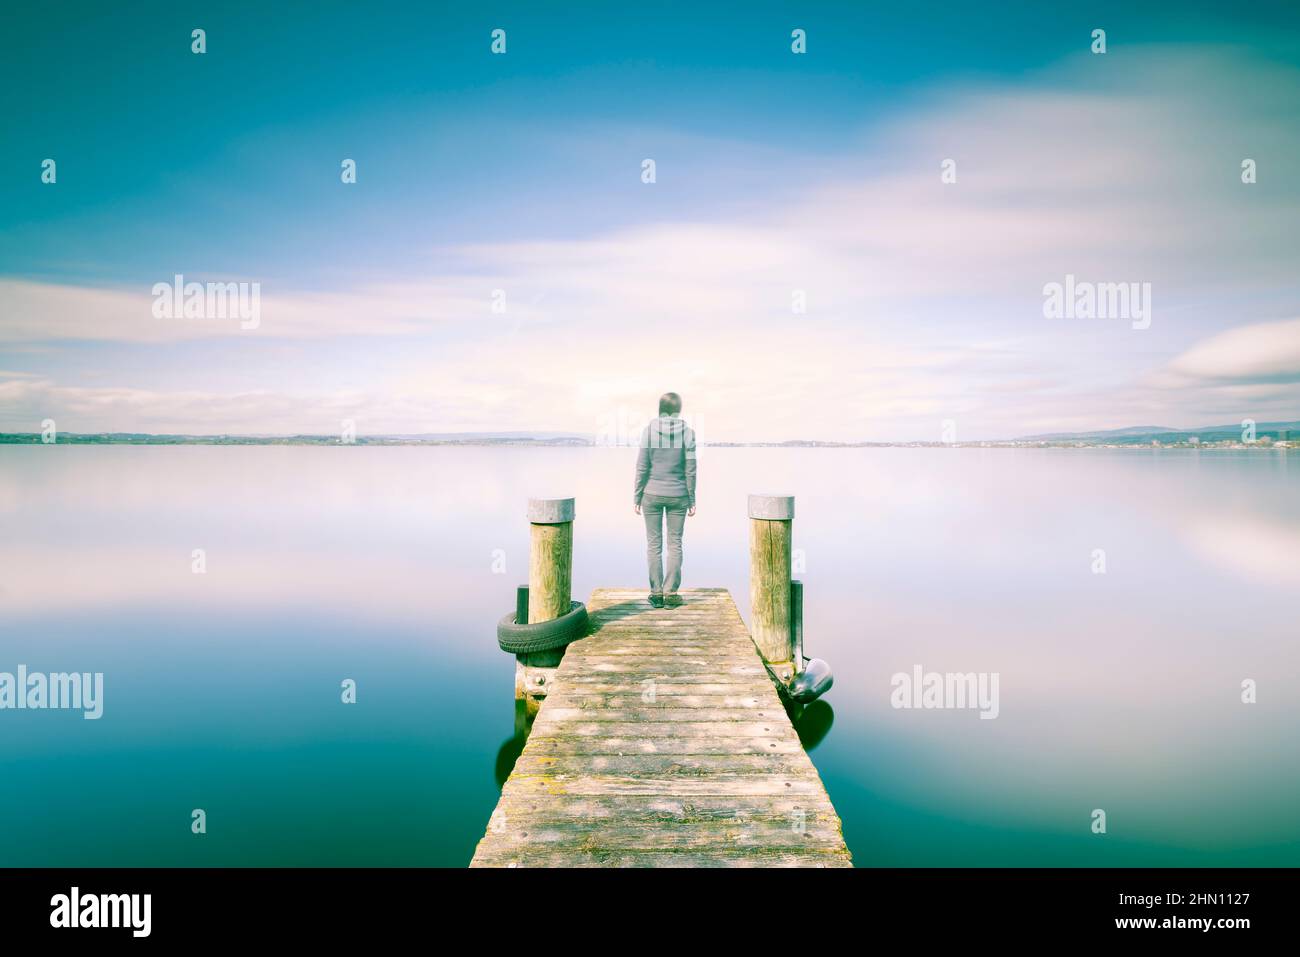 Double Exposure. Female figure on a wooden jetty. The shore of the lake, a long exposure. Minimalism, self reflex, meditation. Stock Photo